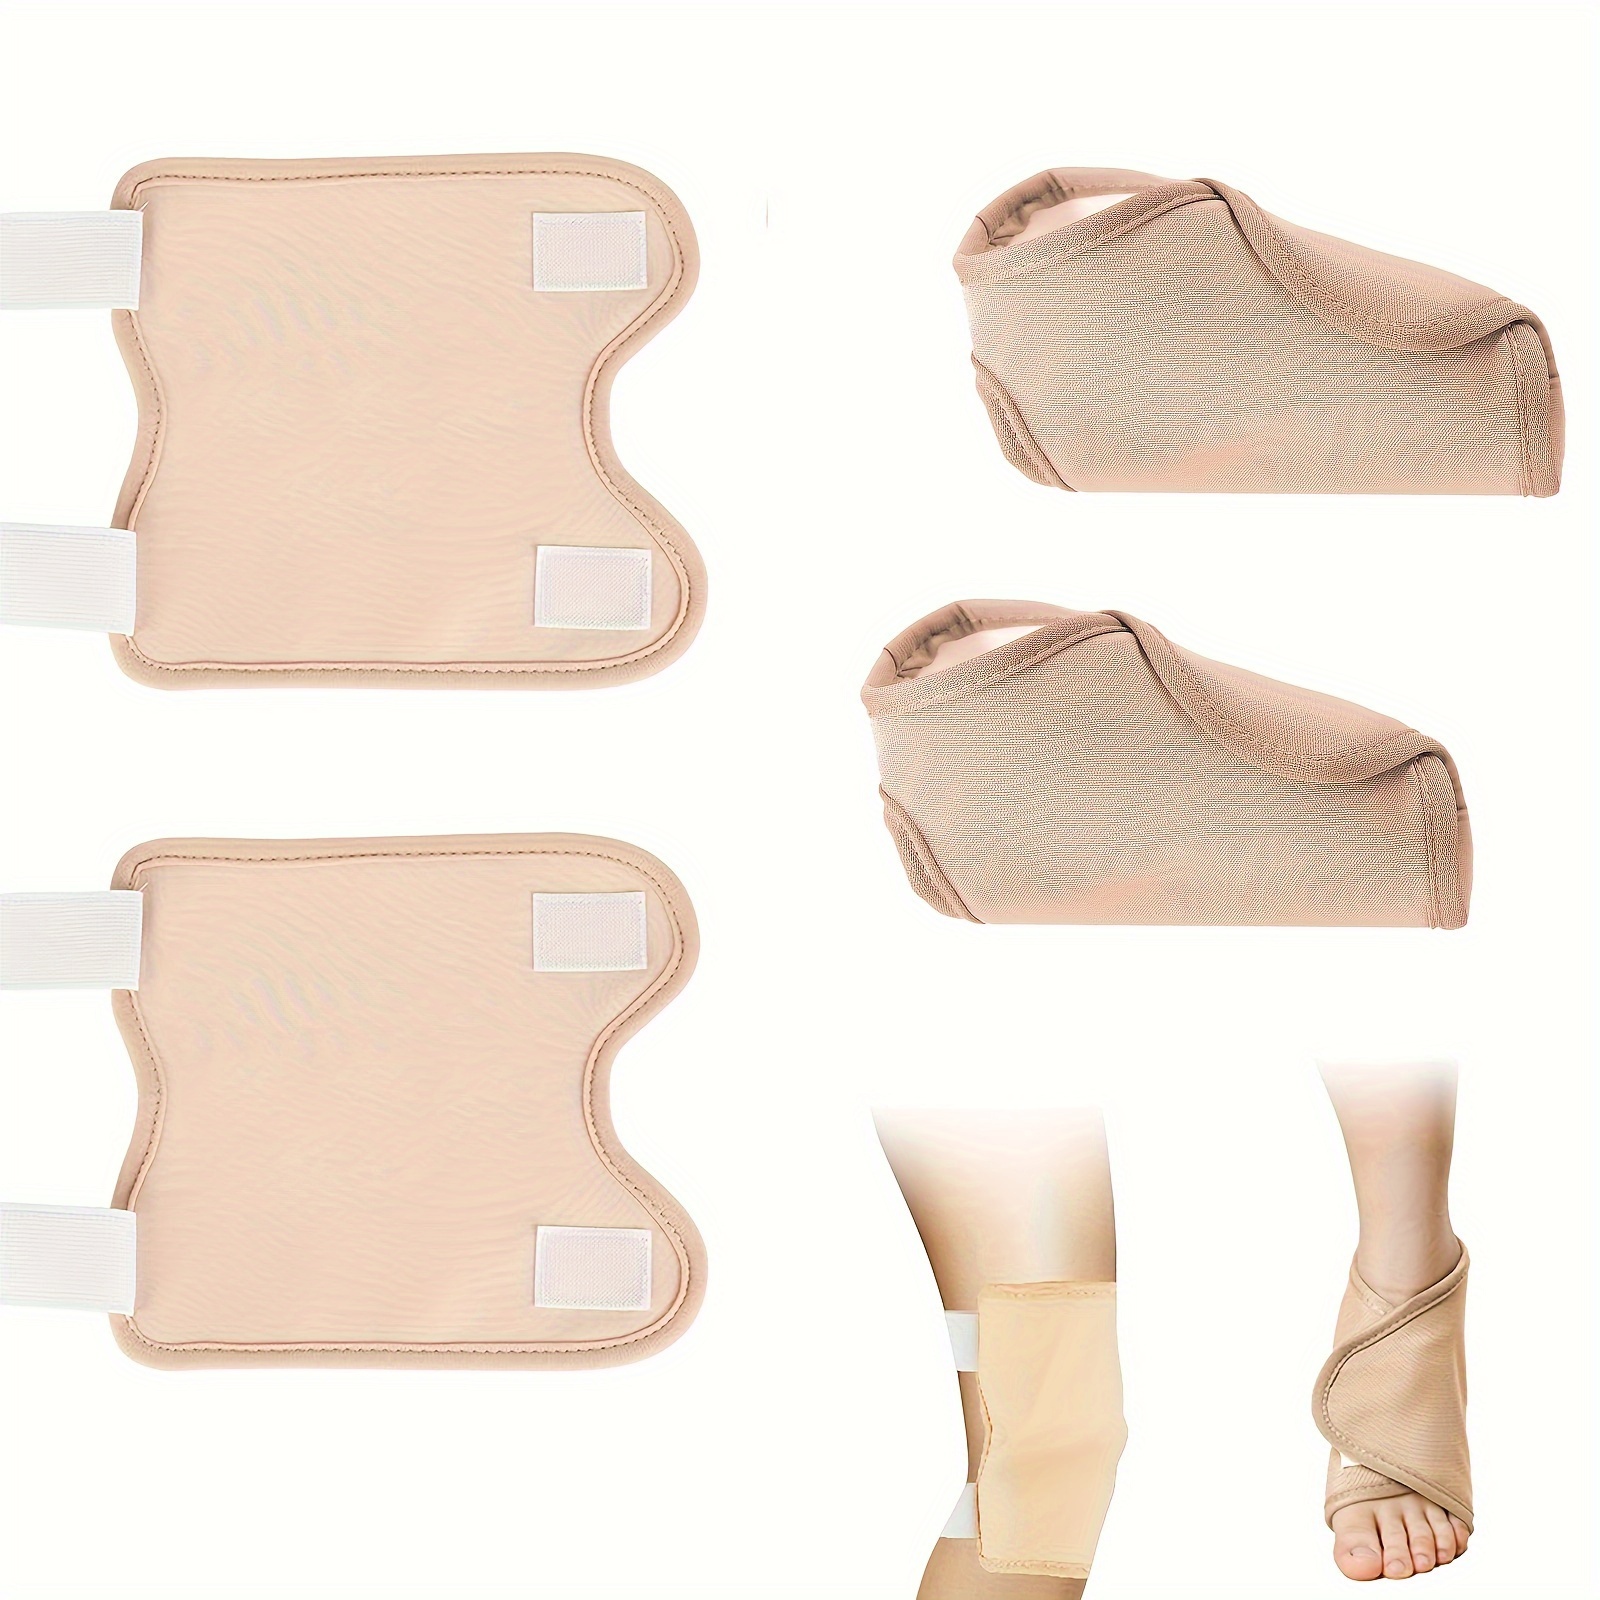 

4pcs 2 Ankles And 2 Knees Or Elbows Castor Oil Pack, Foot Castor Oil Pack Dressing For Women's Ankle Support, 2 Knee Or Elbow Packs For Any Age, Castor Oil Free (khaki)